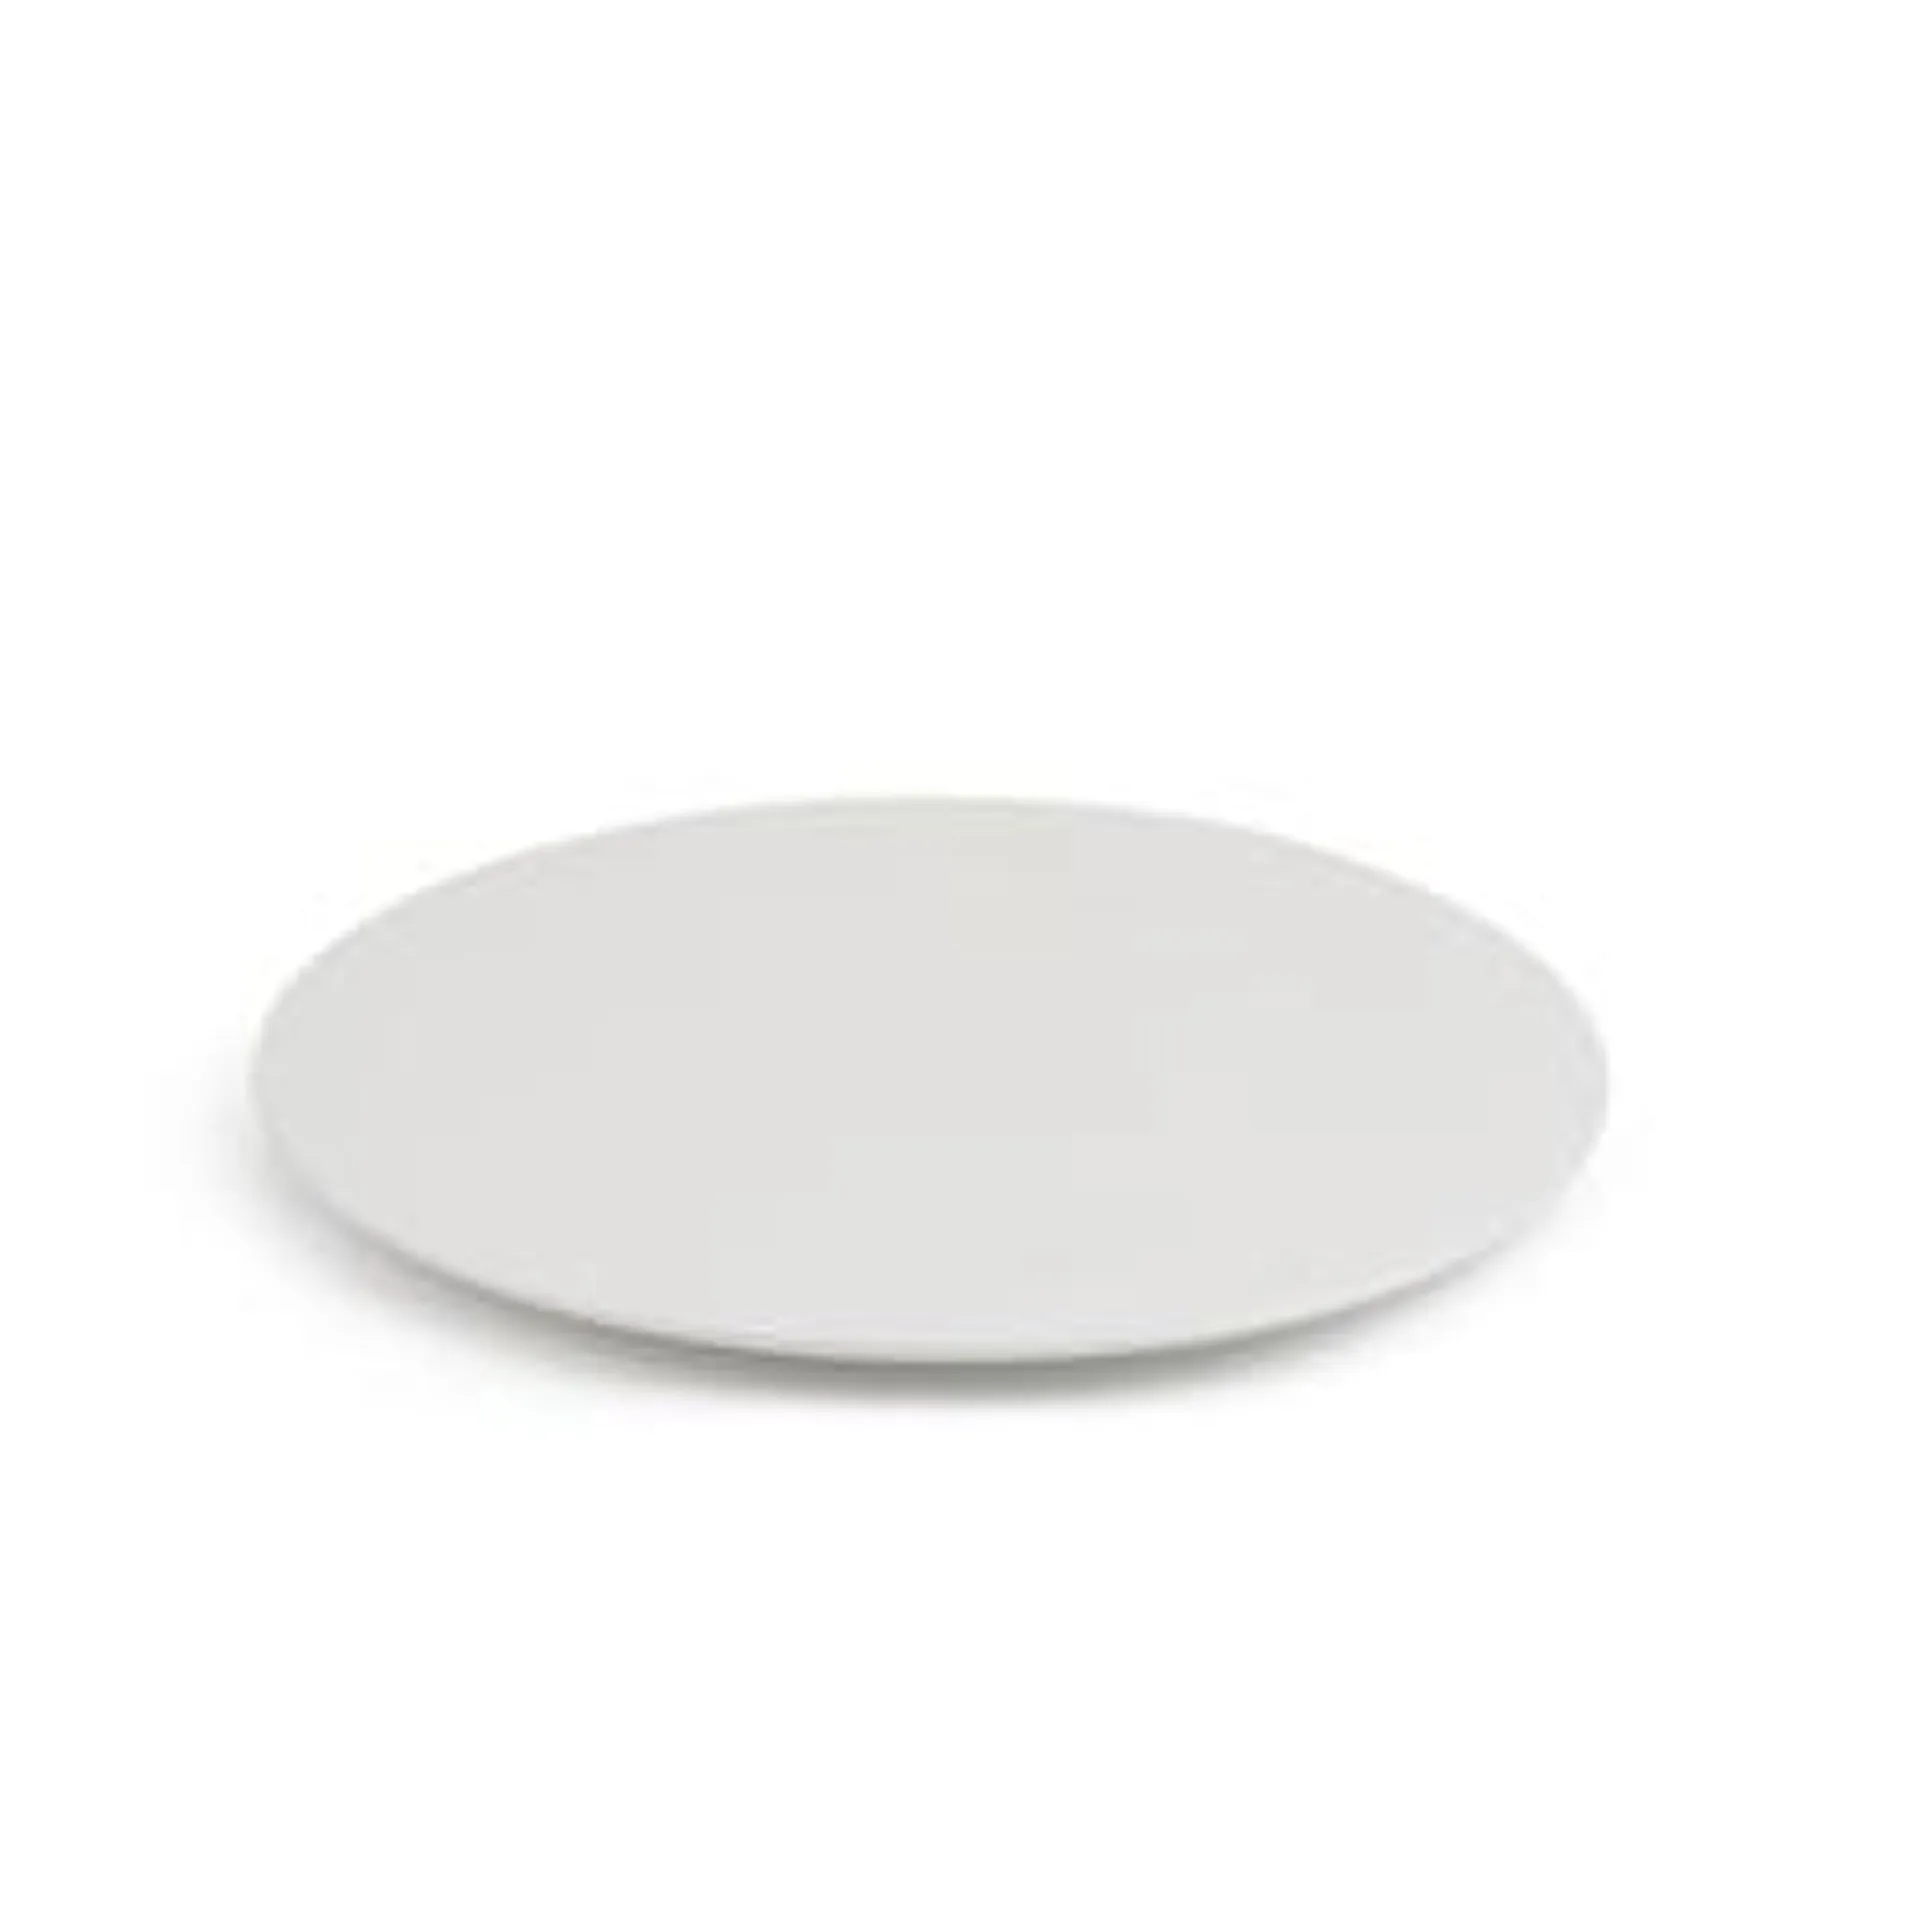 Soffritto Cake Serving Plate, 30cm